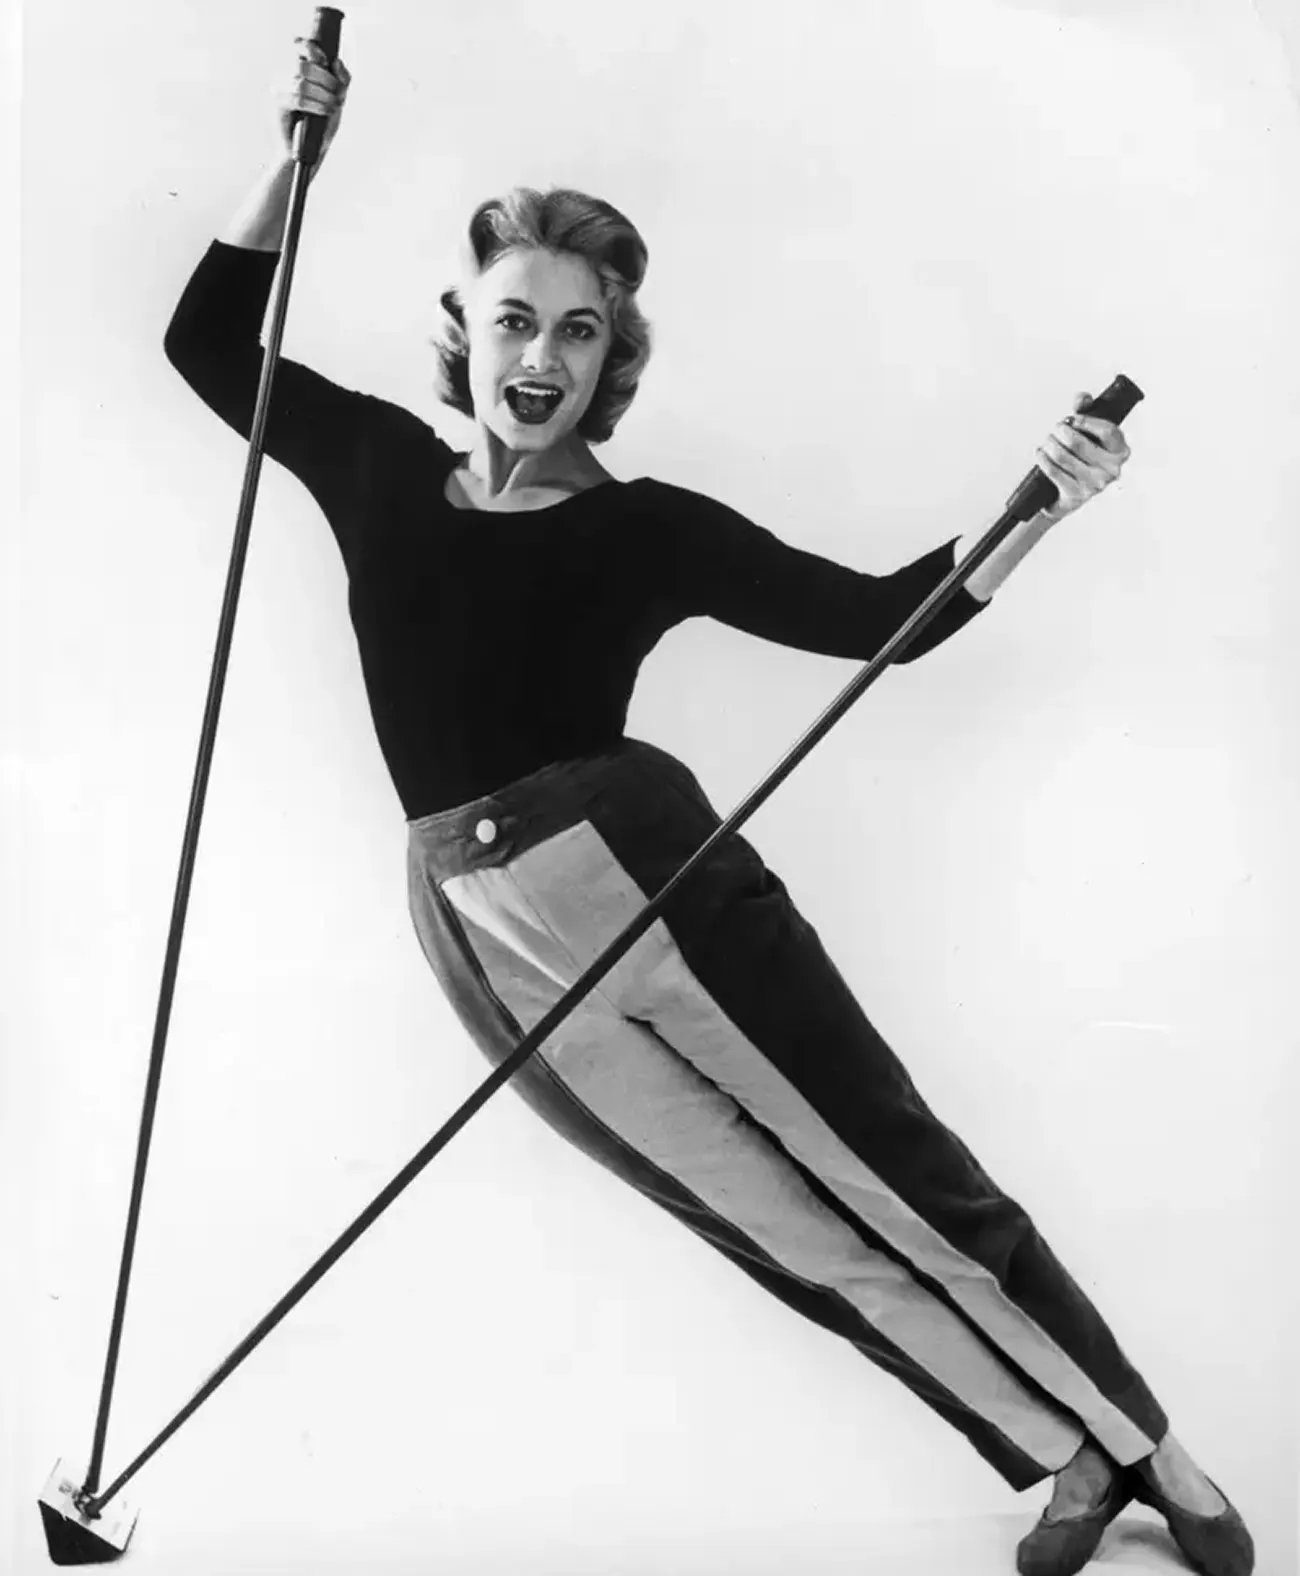 The Las Picas is an exercise apparatus that became popular in the late ’60s. It allowed users to contort every which way.